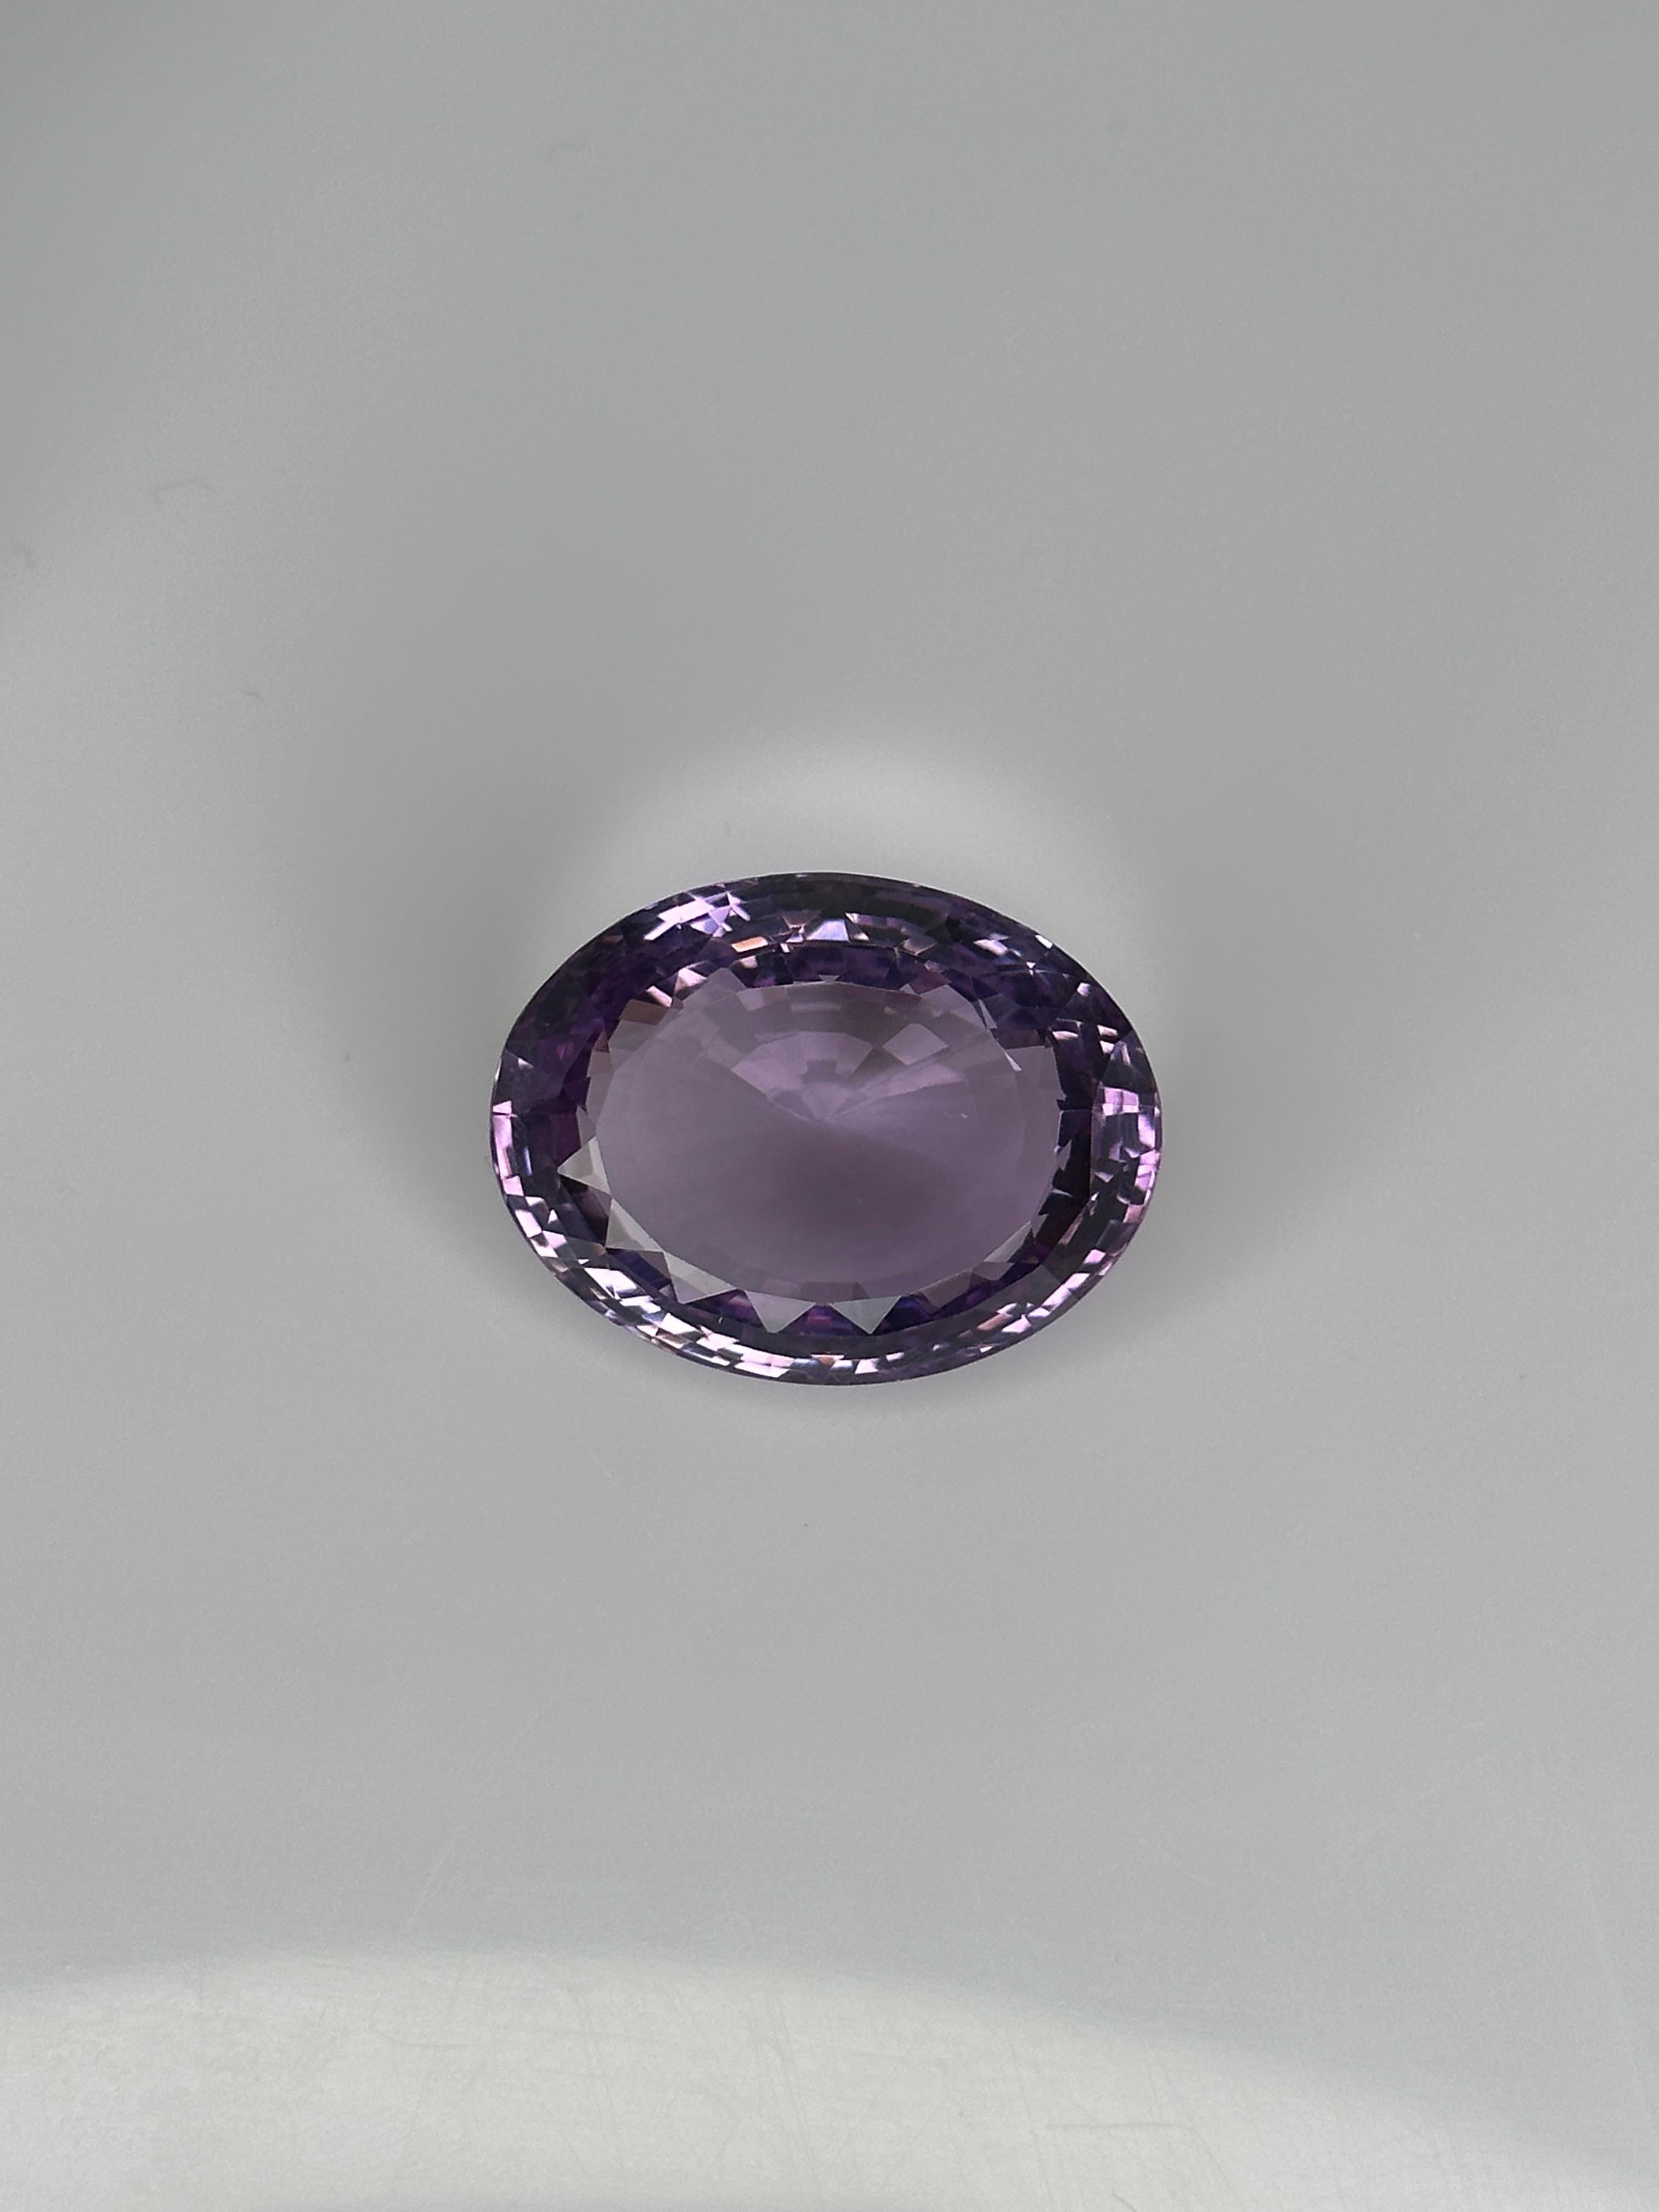 A collector's 64.62 carat, Mix-Cut Amethyst.

64.62 carat Oval Light Purple Amethyst
Shape: Oval
Crown: Modified Brilliant
Pavilion: Step
Dimensions: 30.02 x 22.85 x 15.46 mm
Color: Light Purple
Weight: 64.62 Carats

No Heat/Treatment

This stone is